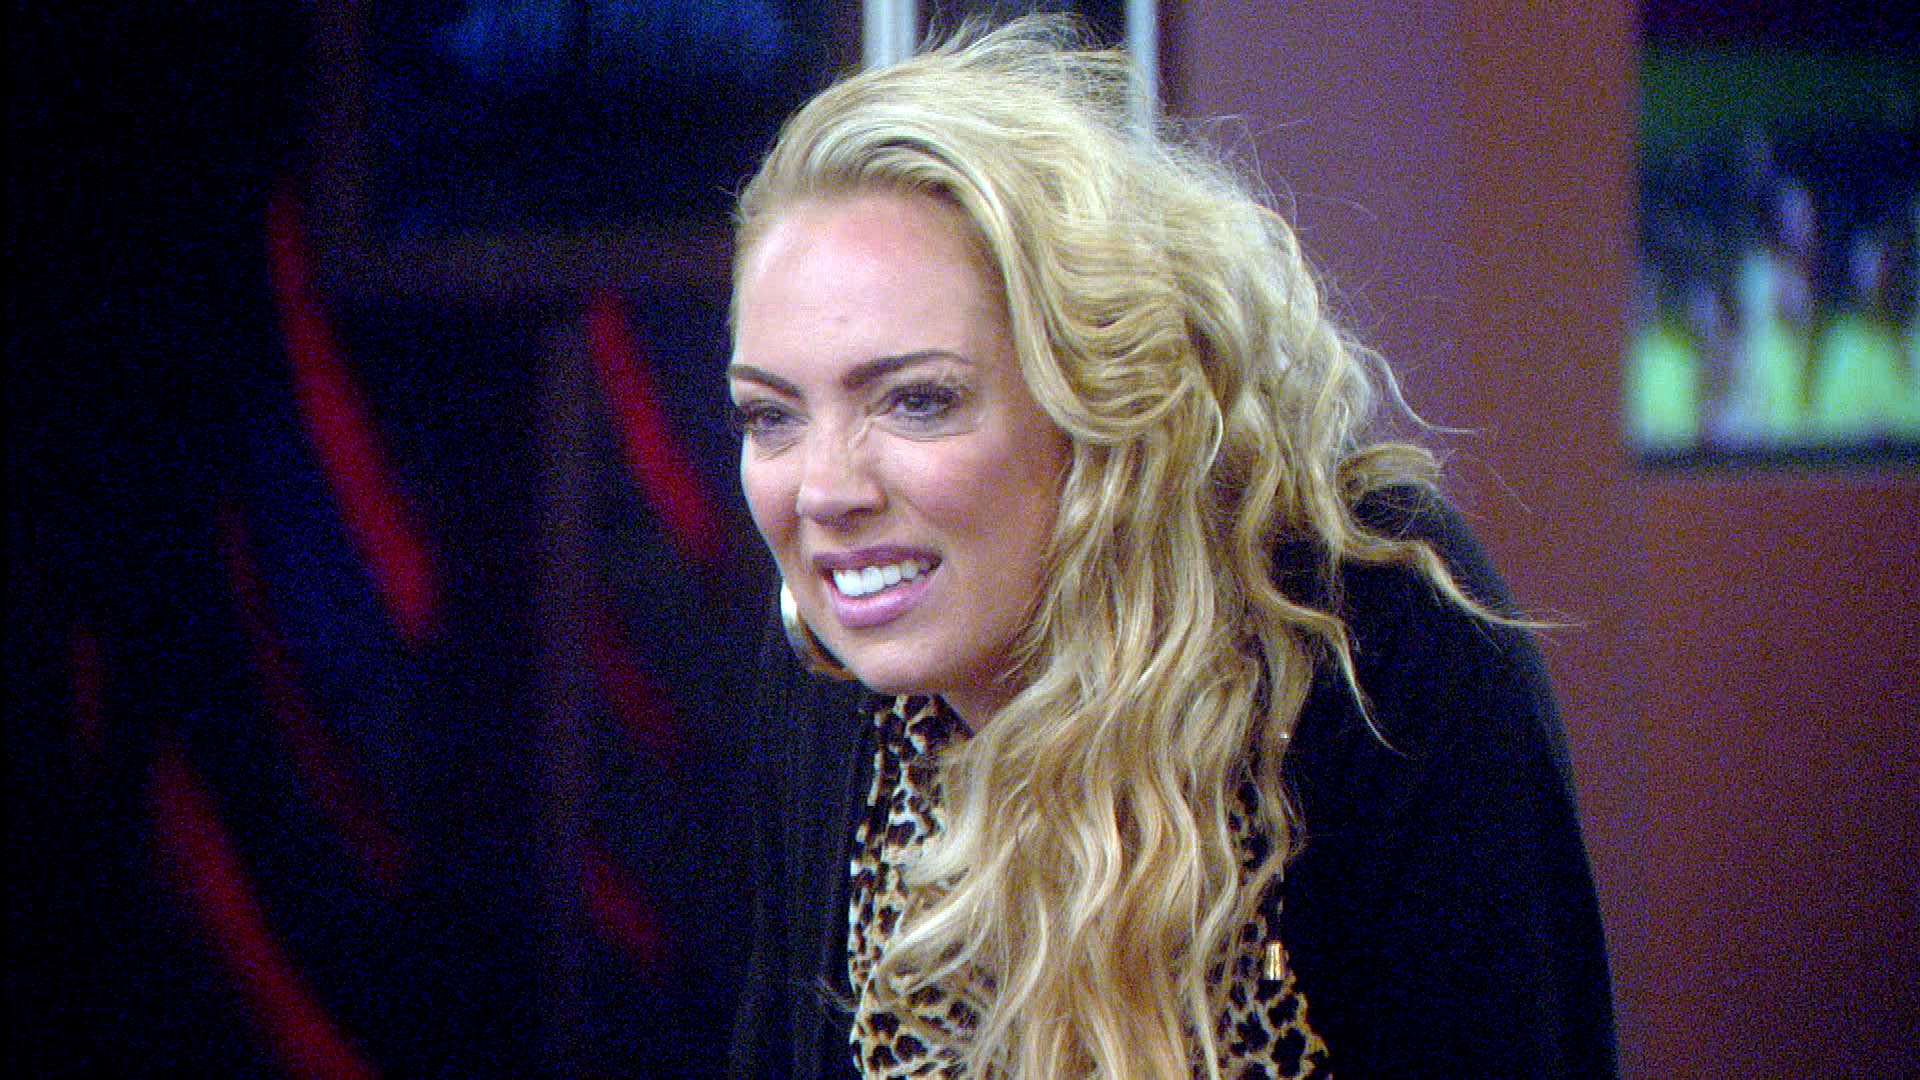 Day 52: Aisleyne becomes hotel staff after swap with Marc